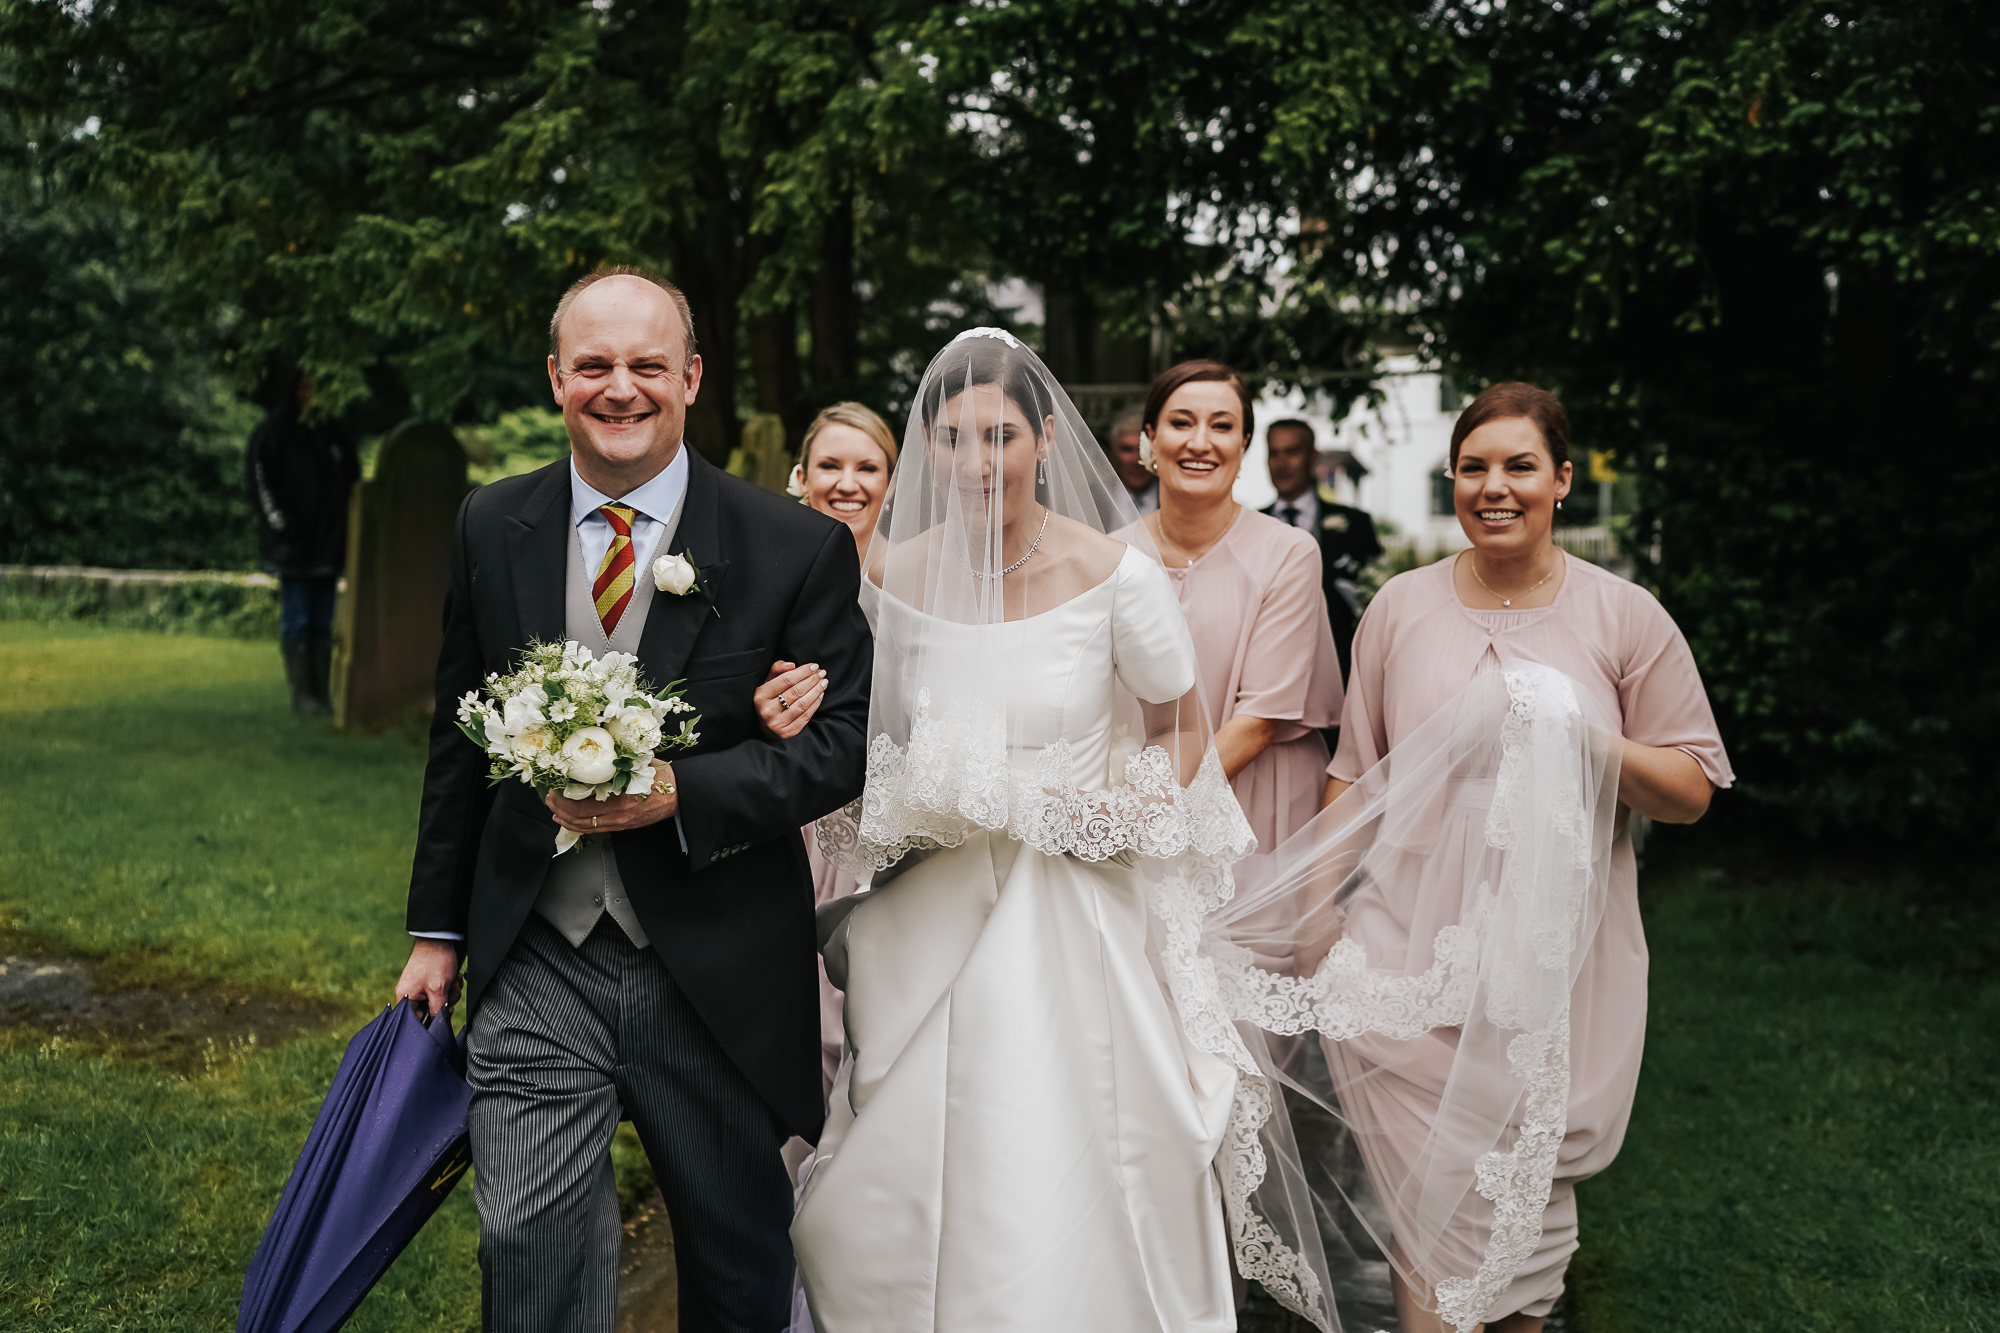 Cheshire wedding at home wedding photography (14 of 49).jpg